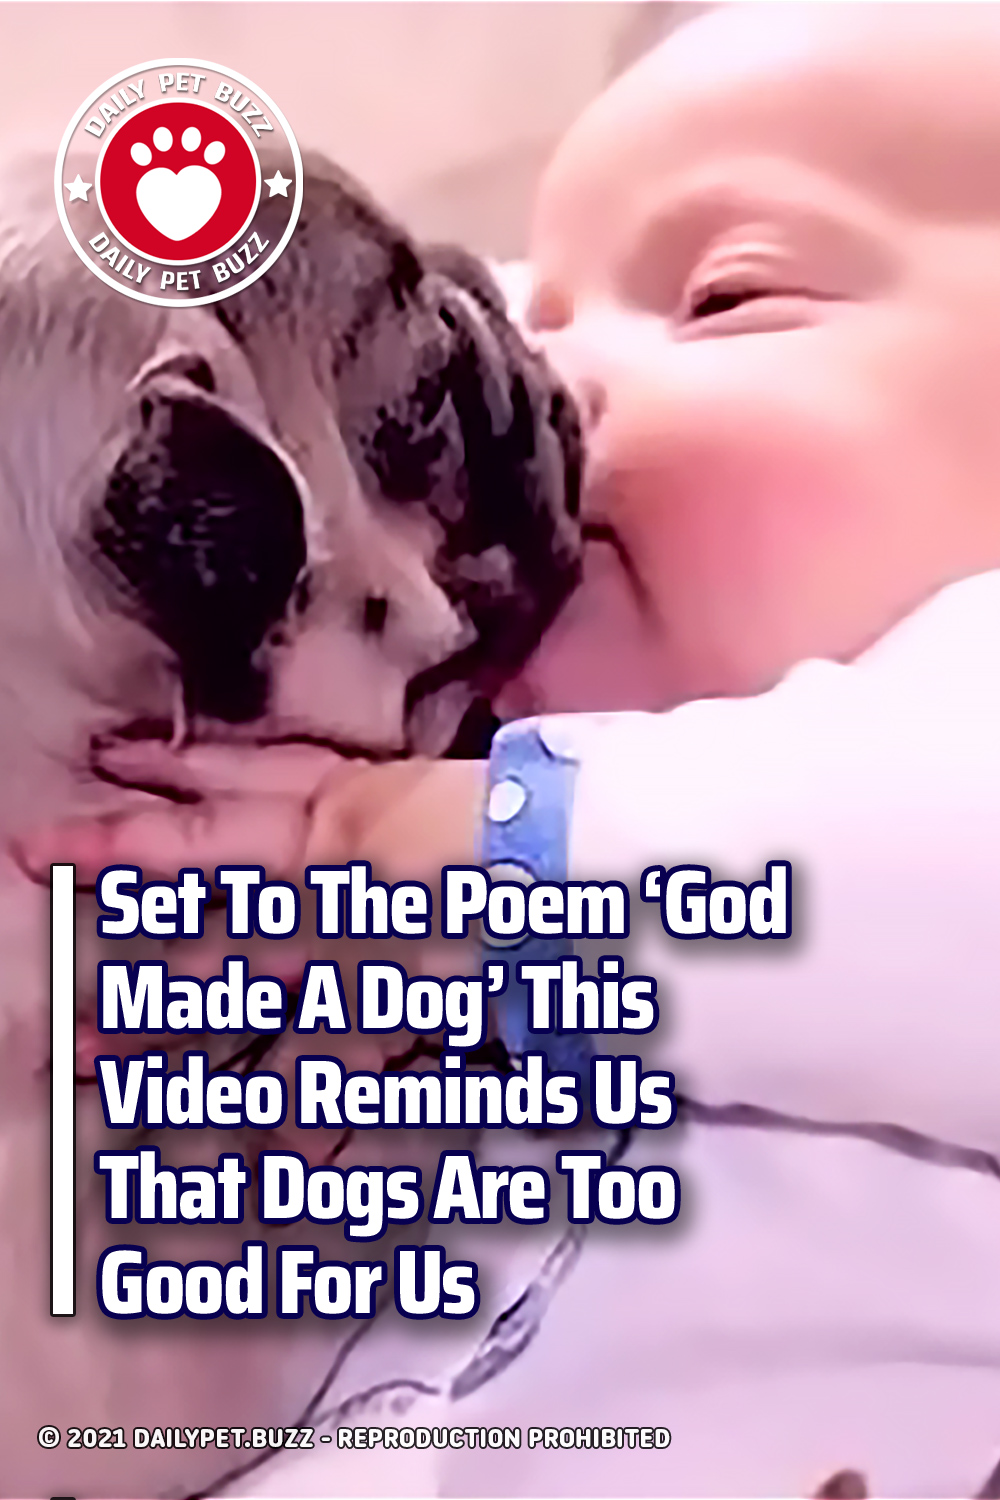 Set To The Poem \'God Made A Dog\' This Video Reminds Us That Dogs Are Too Good For Us